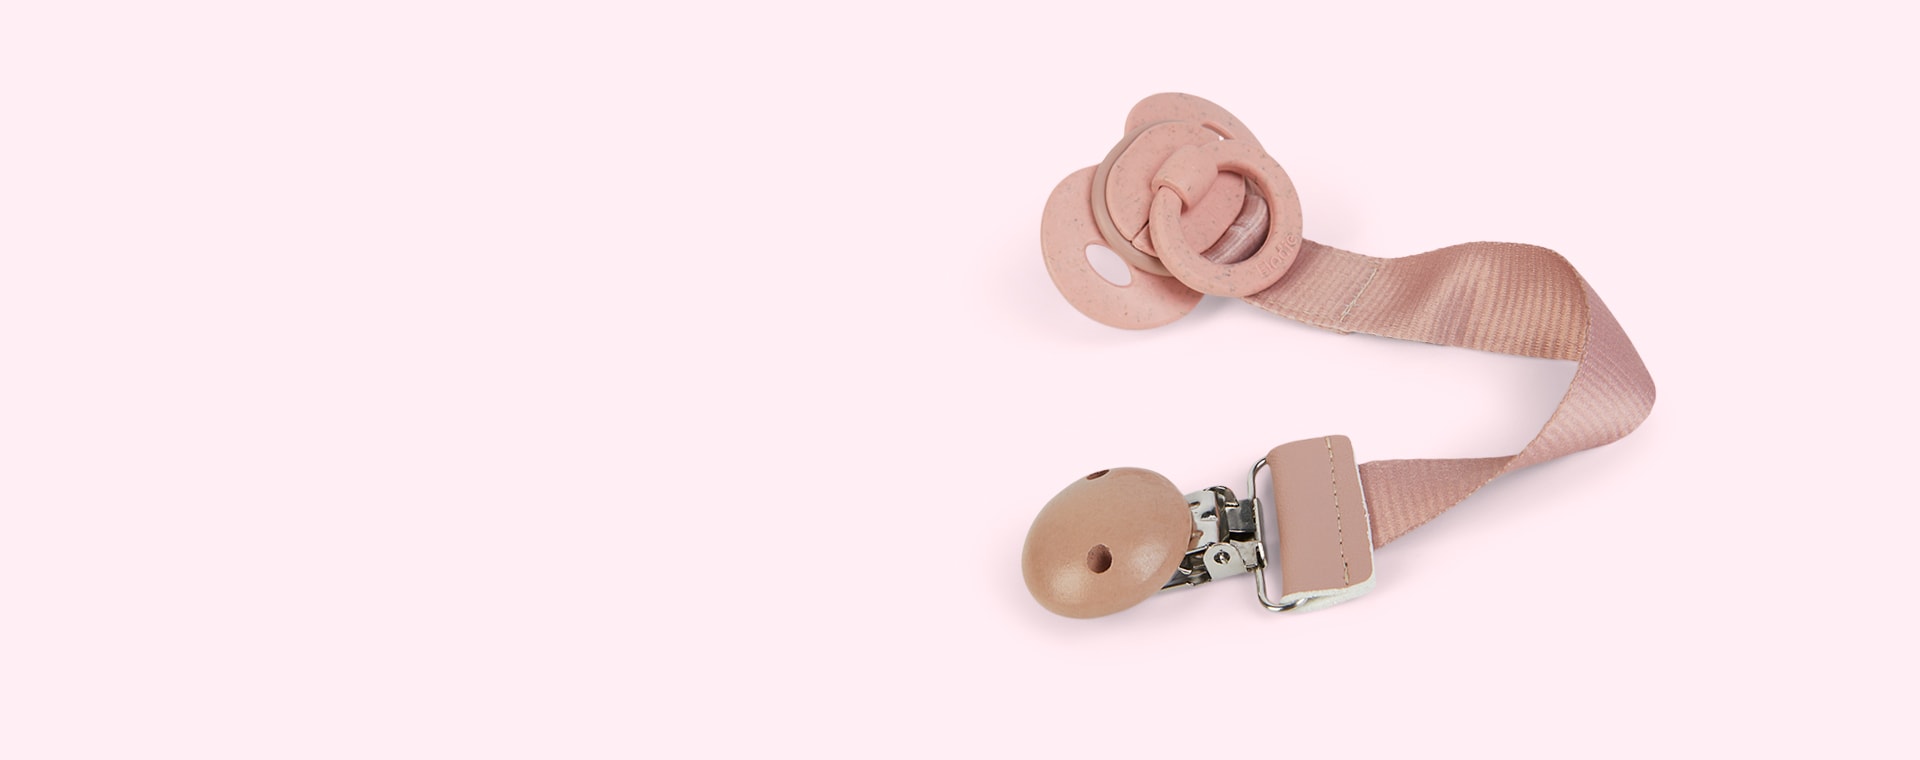 Faded Rose Elodie Wood Soother Clip